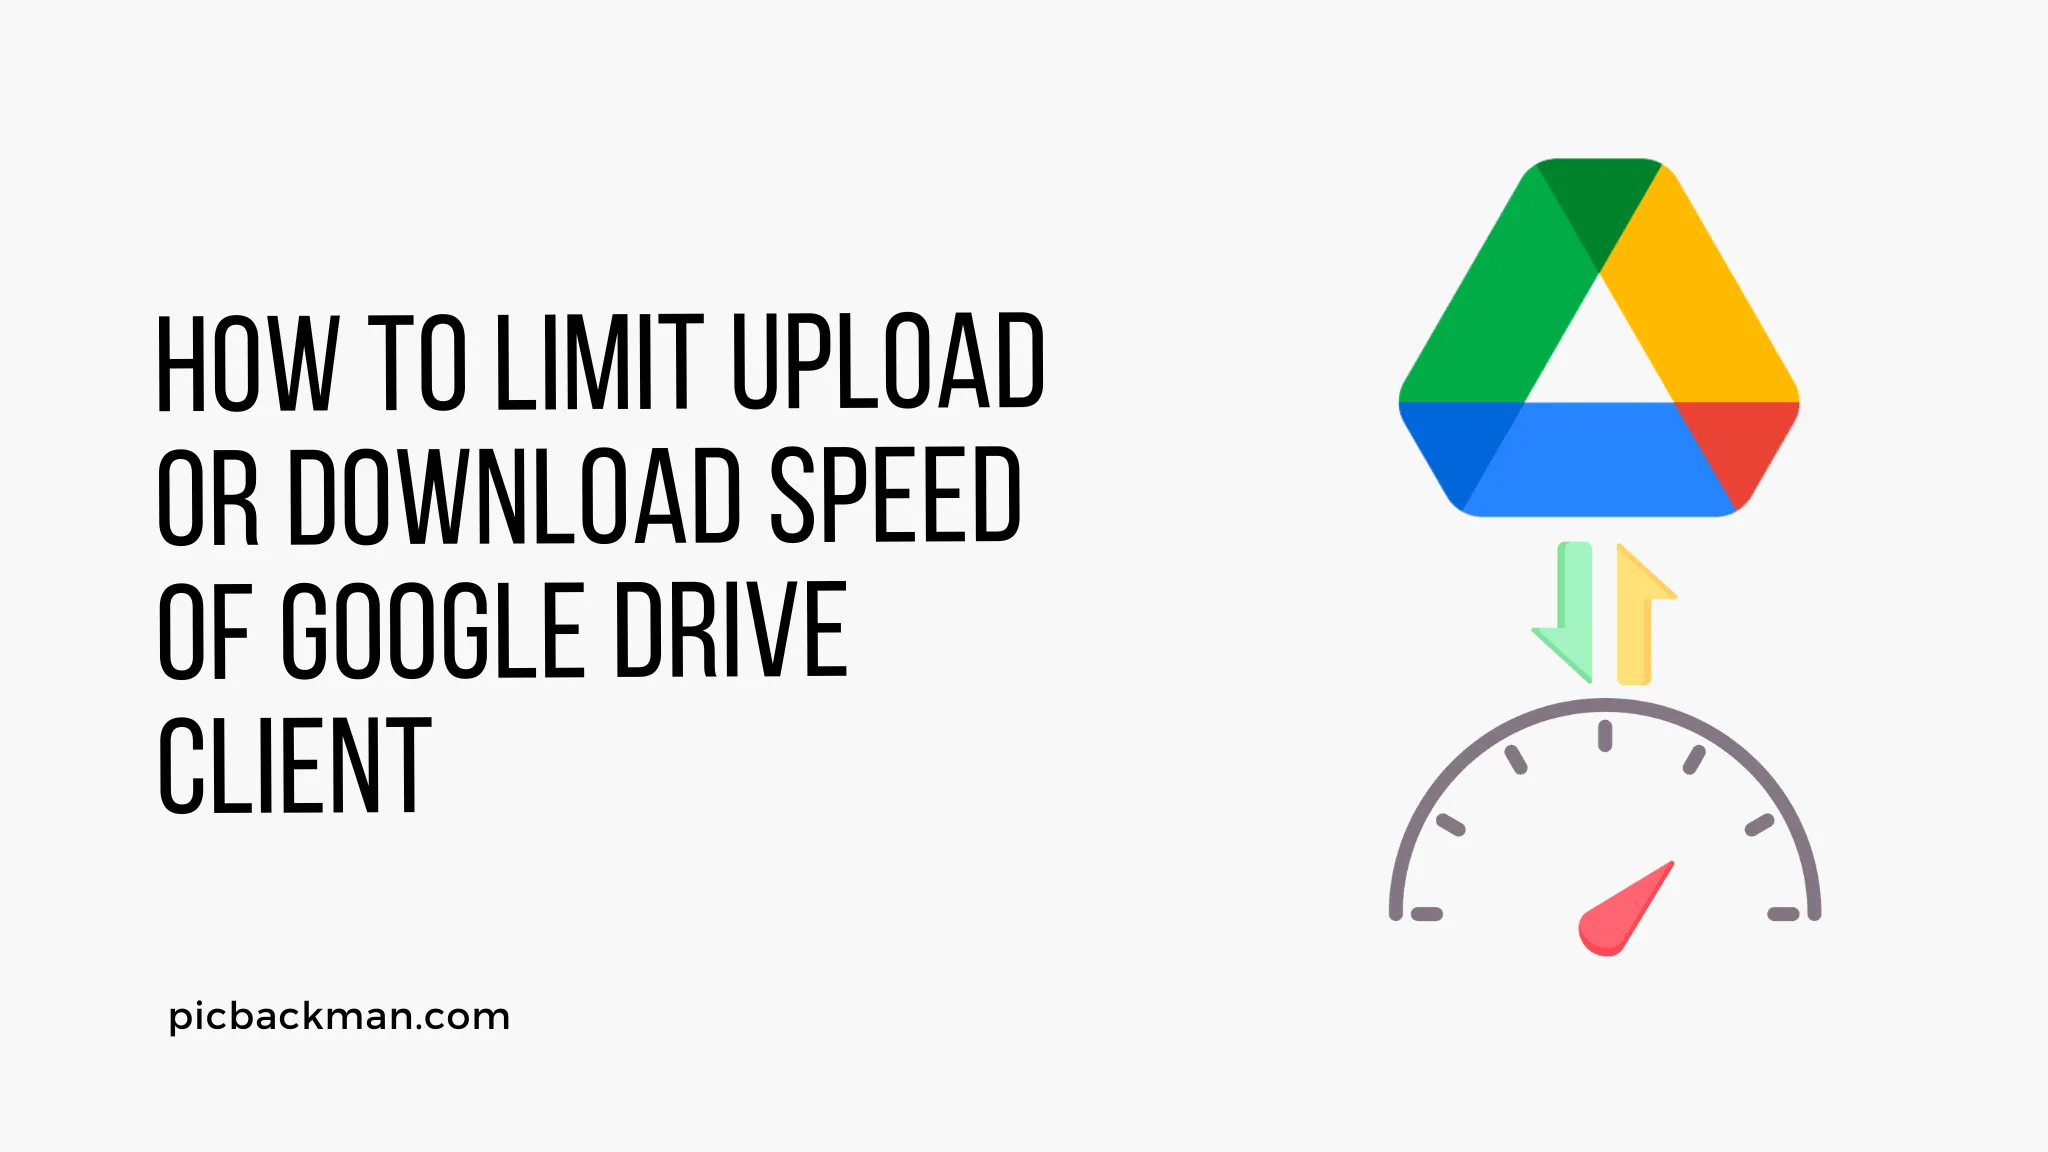 How to Limit Upload or Download Speed of Google Drive Client